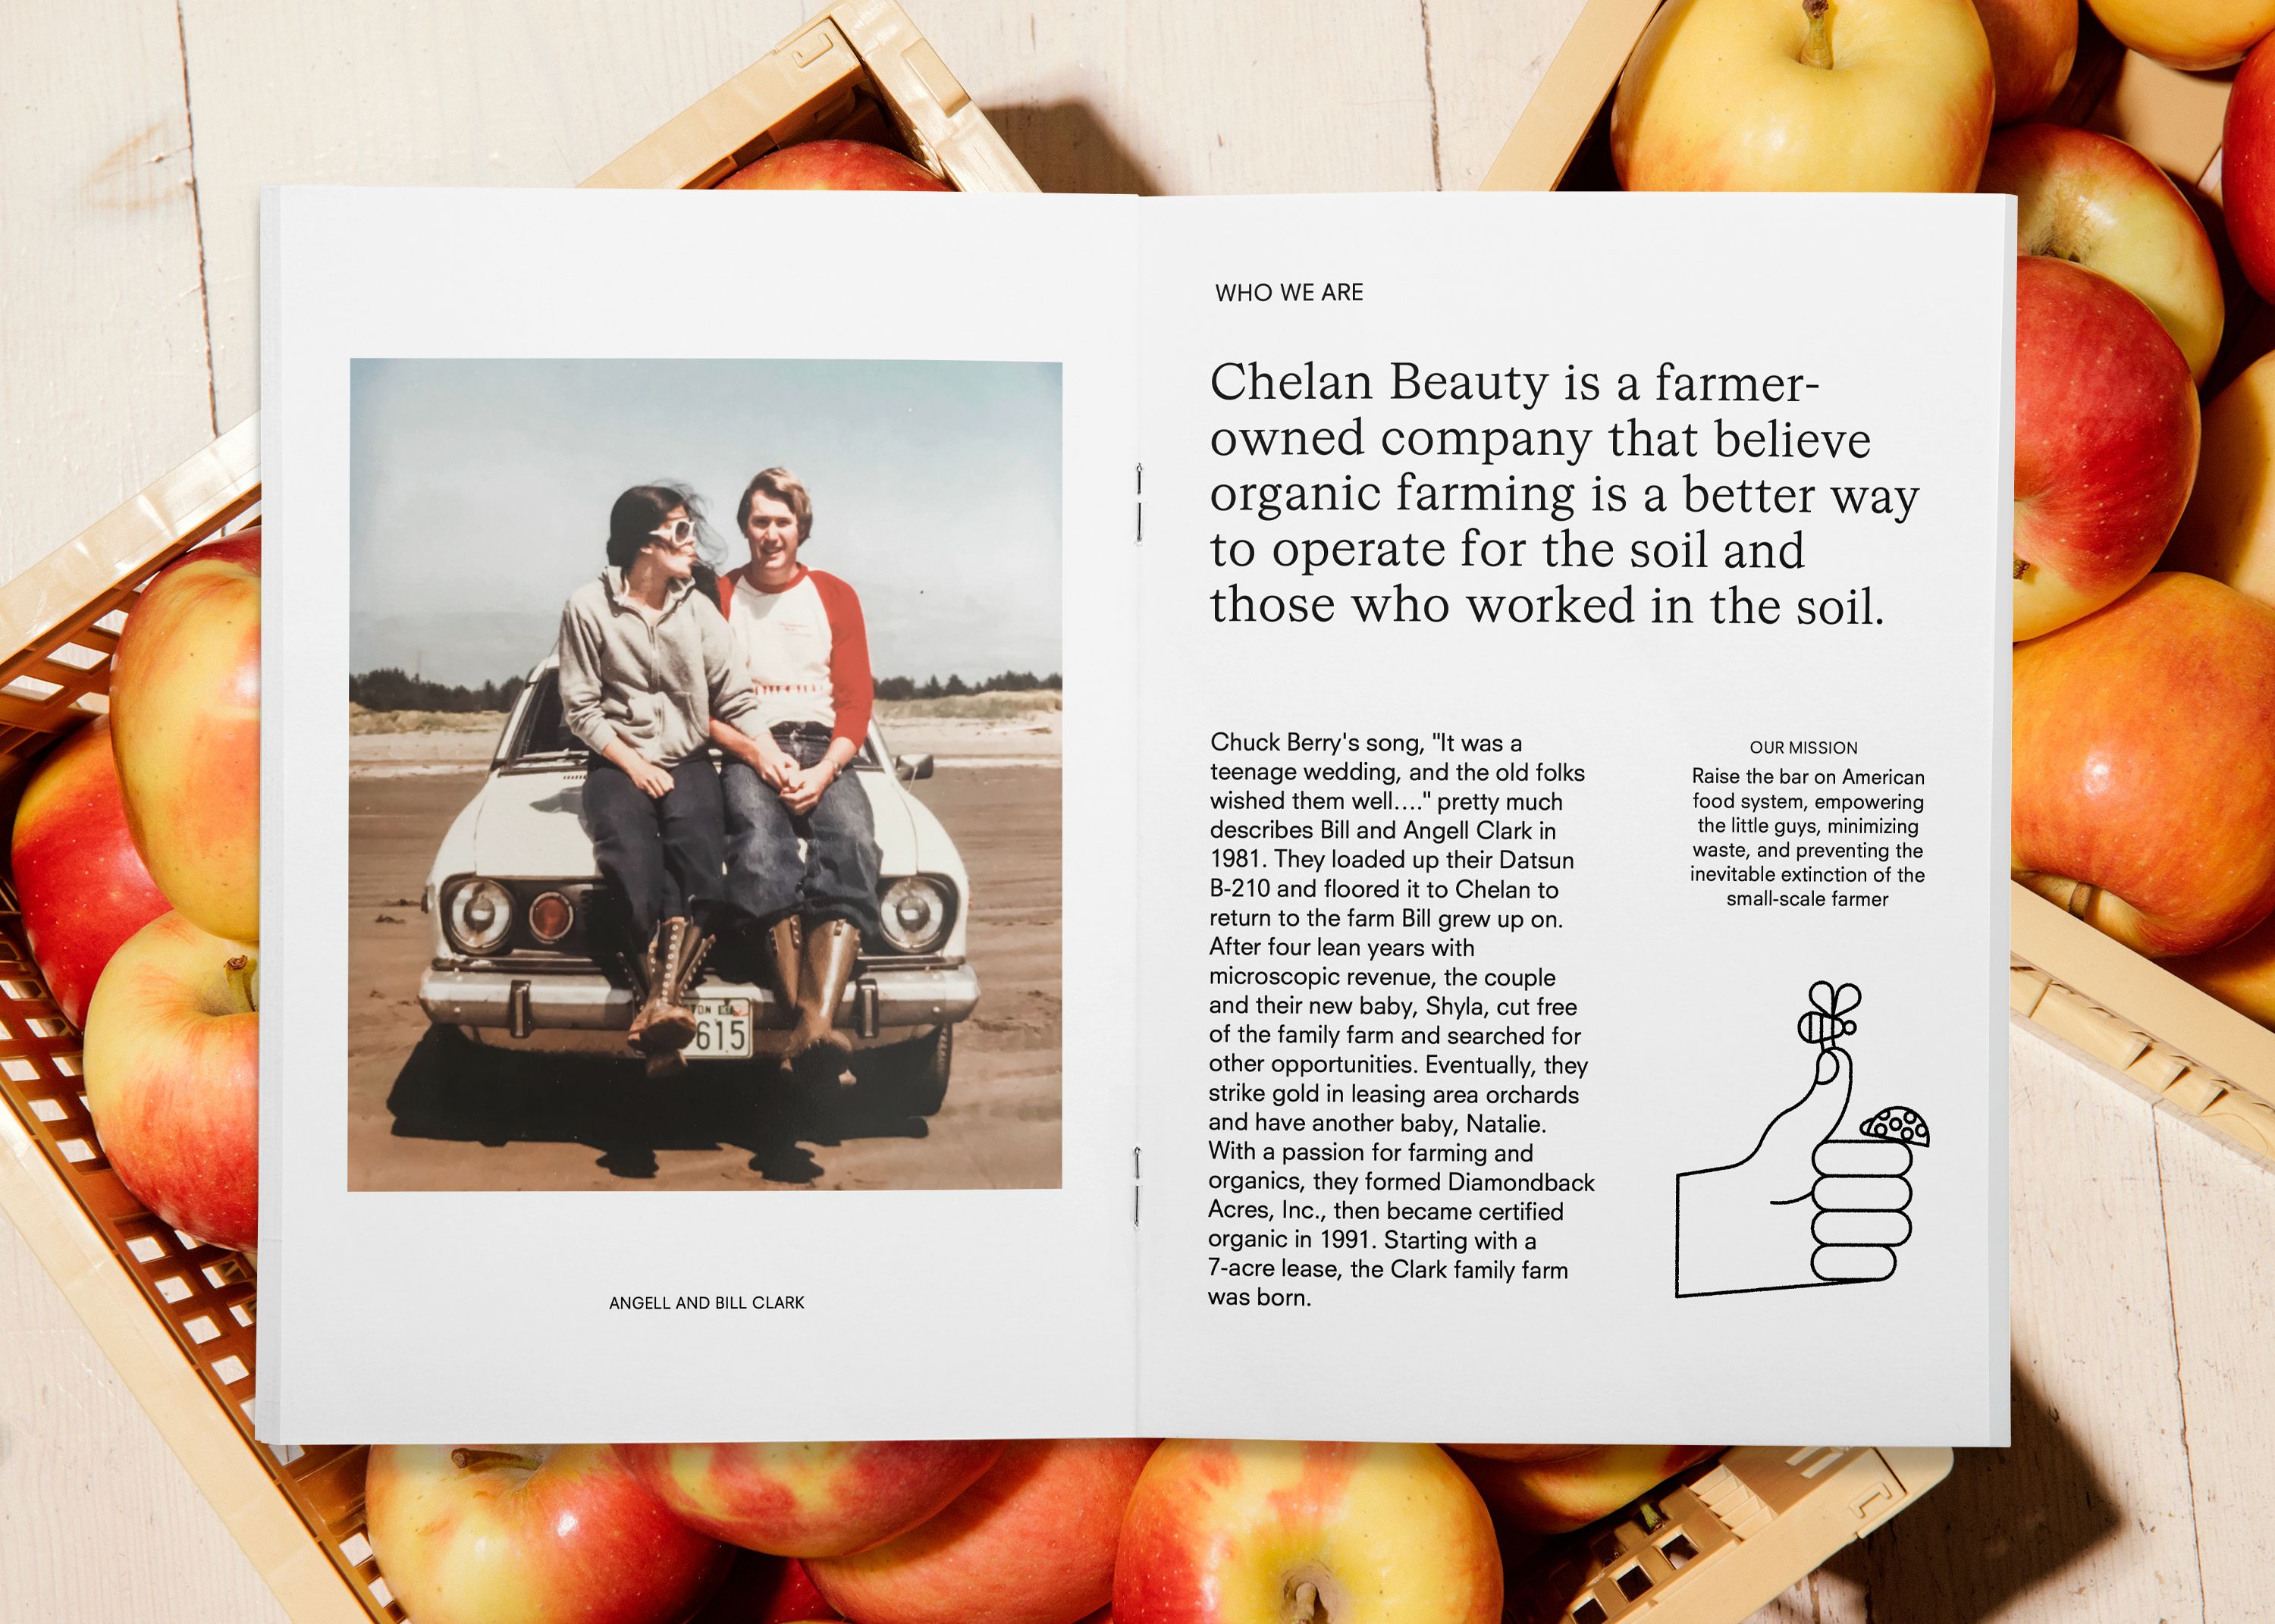 New brand identity and packaging design by Olssøn Barbieri for freeze dried organic fruit company Chelan Beauty. Reviewed by Emily Gosling.